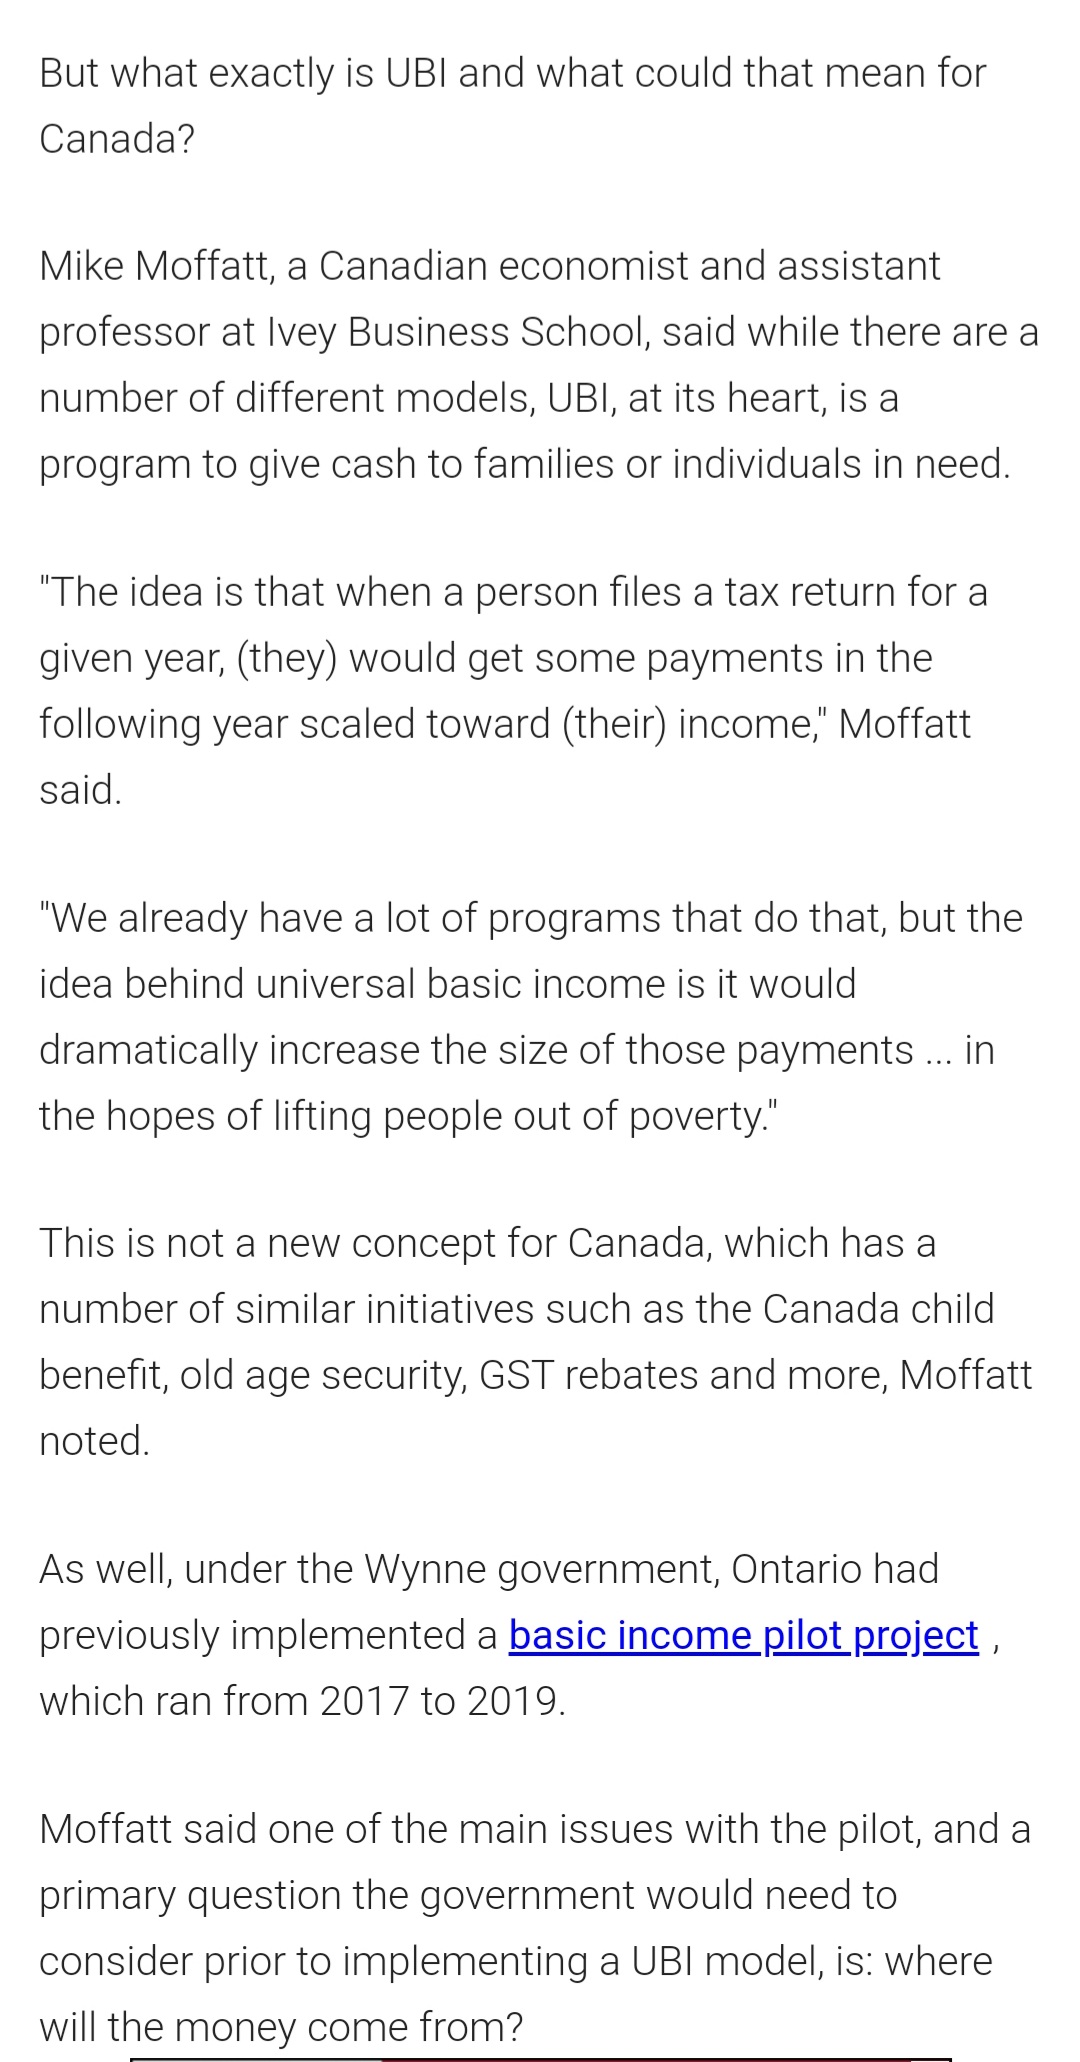 But what exactly is UBI and what could that mean for
Canada?
Mike Moffatt, a Canadian economist and assistant
professor at Ivey Business School, said while there are a
number of different models, UBI, at its heart, is a
program to give cash to families or individuals in need.
"The idea is that when a person files a tax return for a
given year, (they) would get some payments in the
following year scaled toward (their) income," Moffatt
said.
"We already have a lot of programs that do that, but the
idea behind universal basic income is it would
dramatically increase the size of those payments .. in
the hopes of lifting people out of poverty."
This is not a new concept for Canada, which has a
number of similar initiatives such as the Canada child
benefit, old age security, GST rebates and more, Moffatt
noted.
As well, under the Wynne government, Ontario had
previously implemented a basic income pilot project ,
which ran from 2017 to 2019.
Moffatt said one of the main issues with the pilot, and a
primary question the government would need to
consider prior to implementing a UBI model, is: where
will the money come from?
